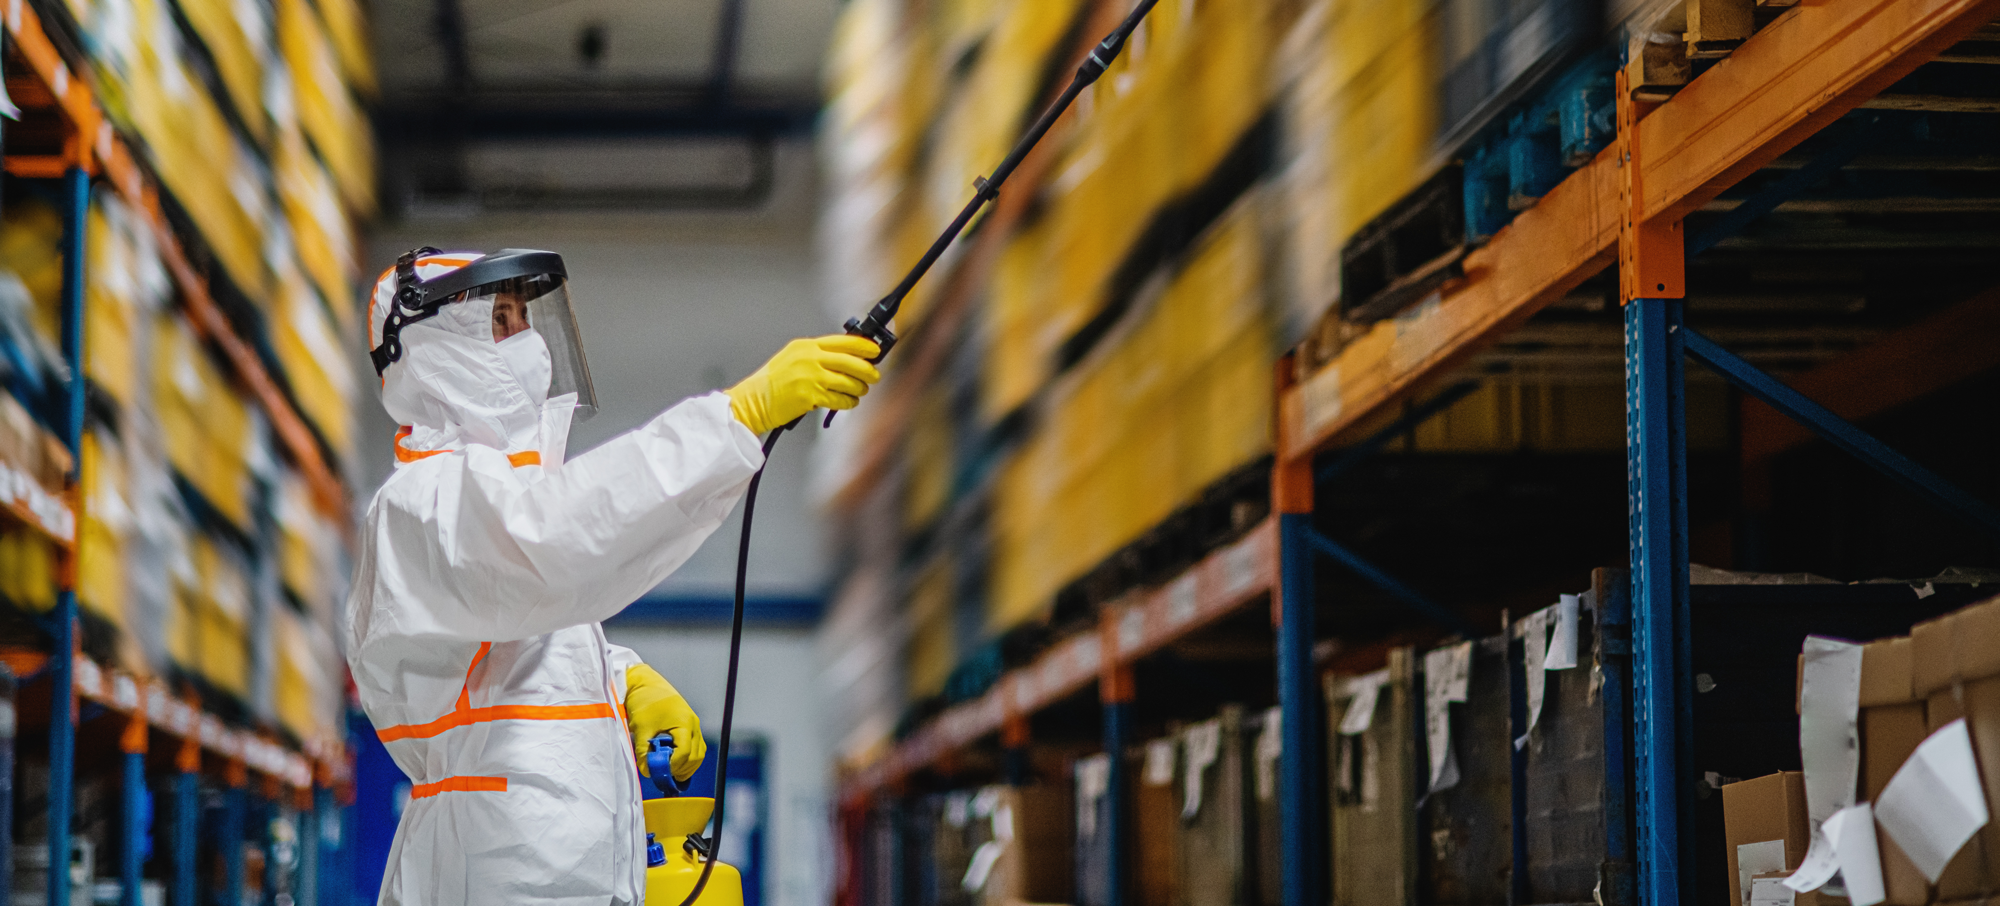 2 Essential Tips for Cleaning an Industrial Space